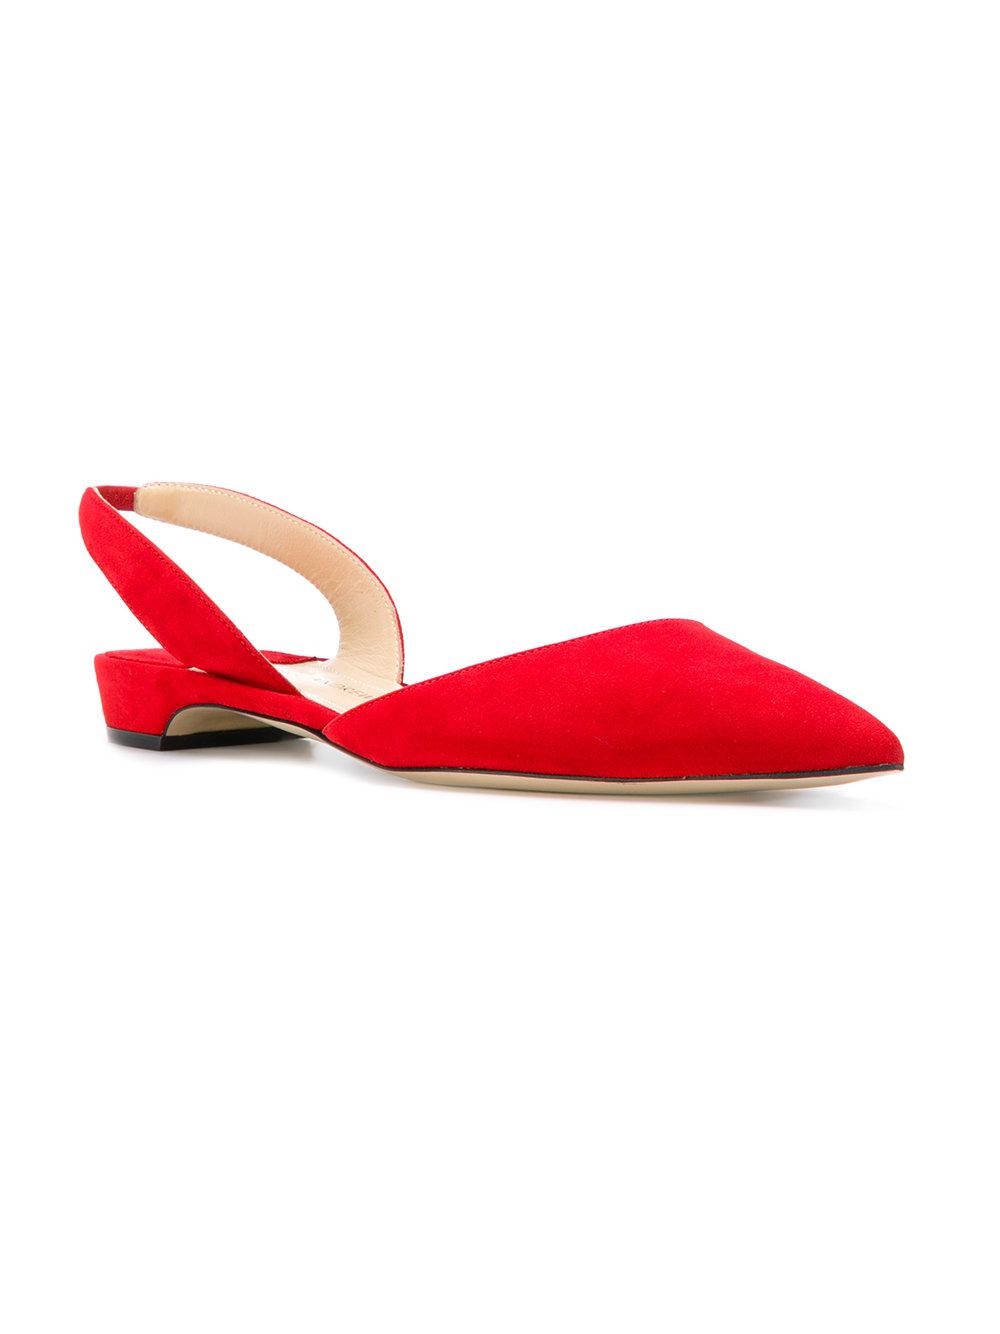 Paul Andrew 'rhea 15' Suede Slingback Flats in Red - Lyst